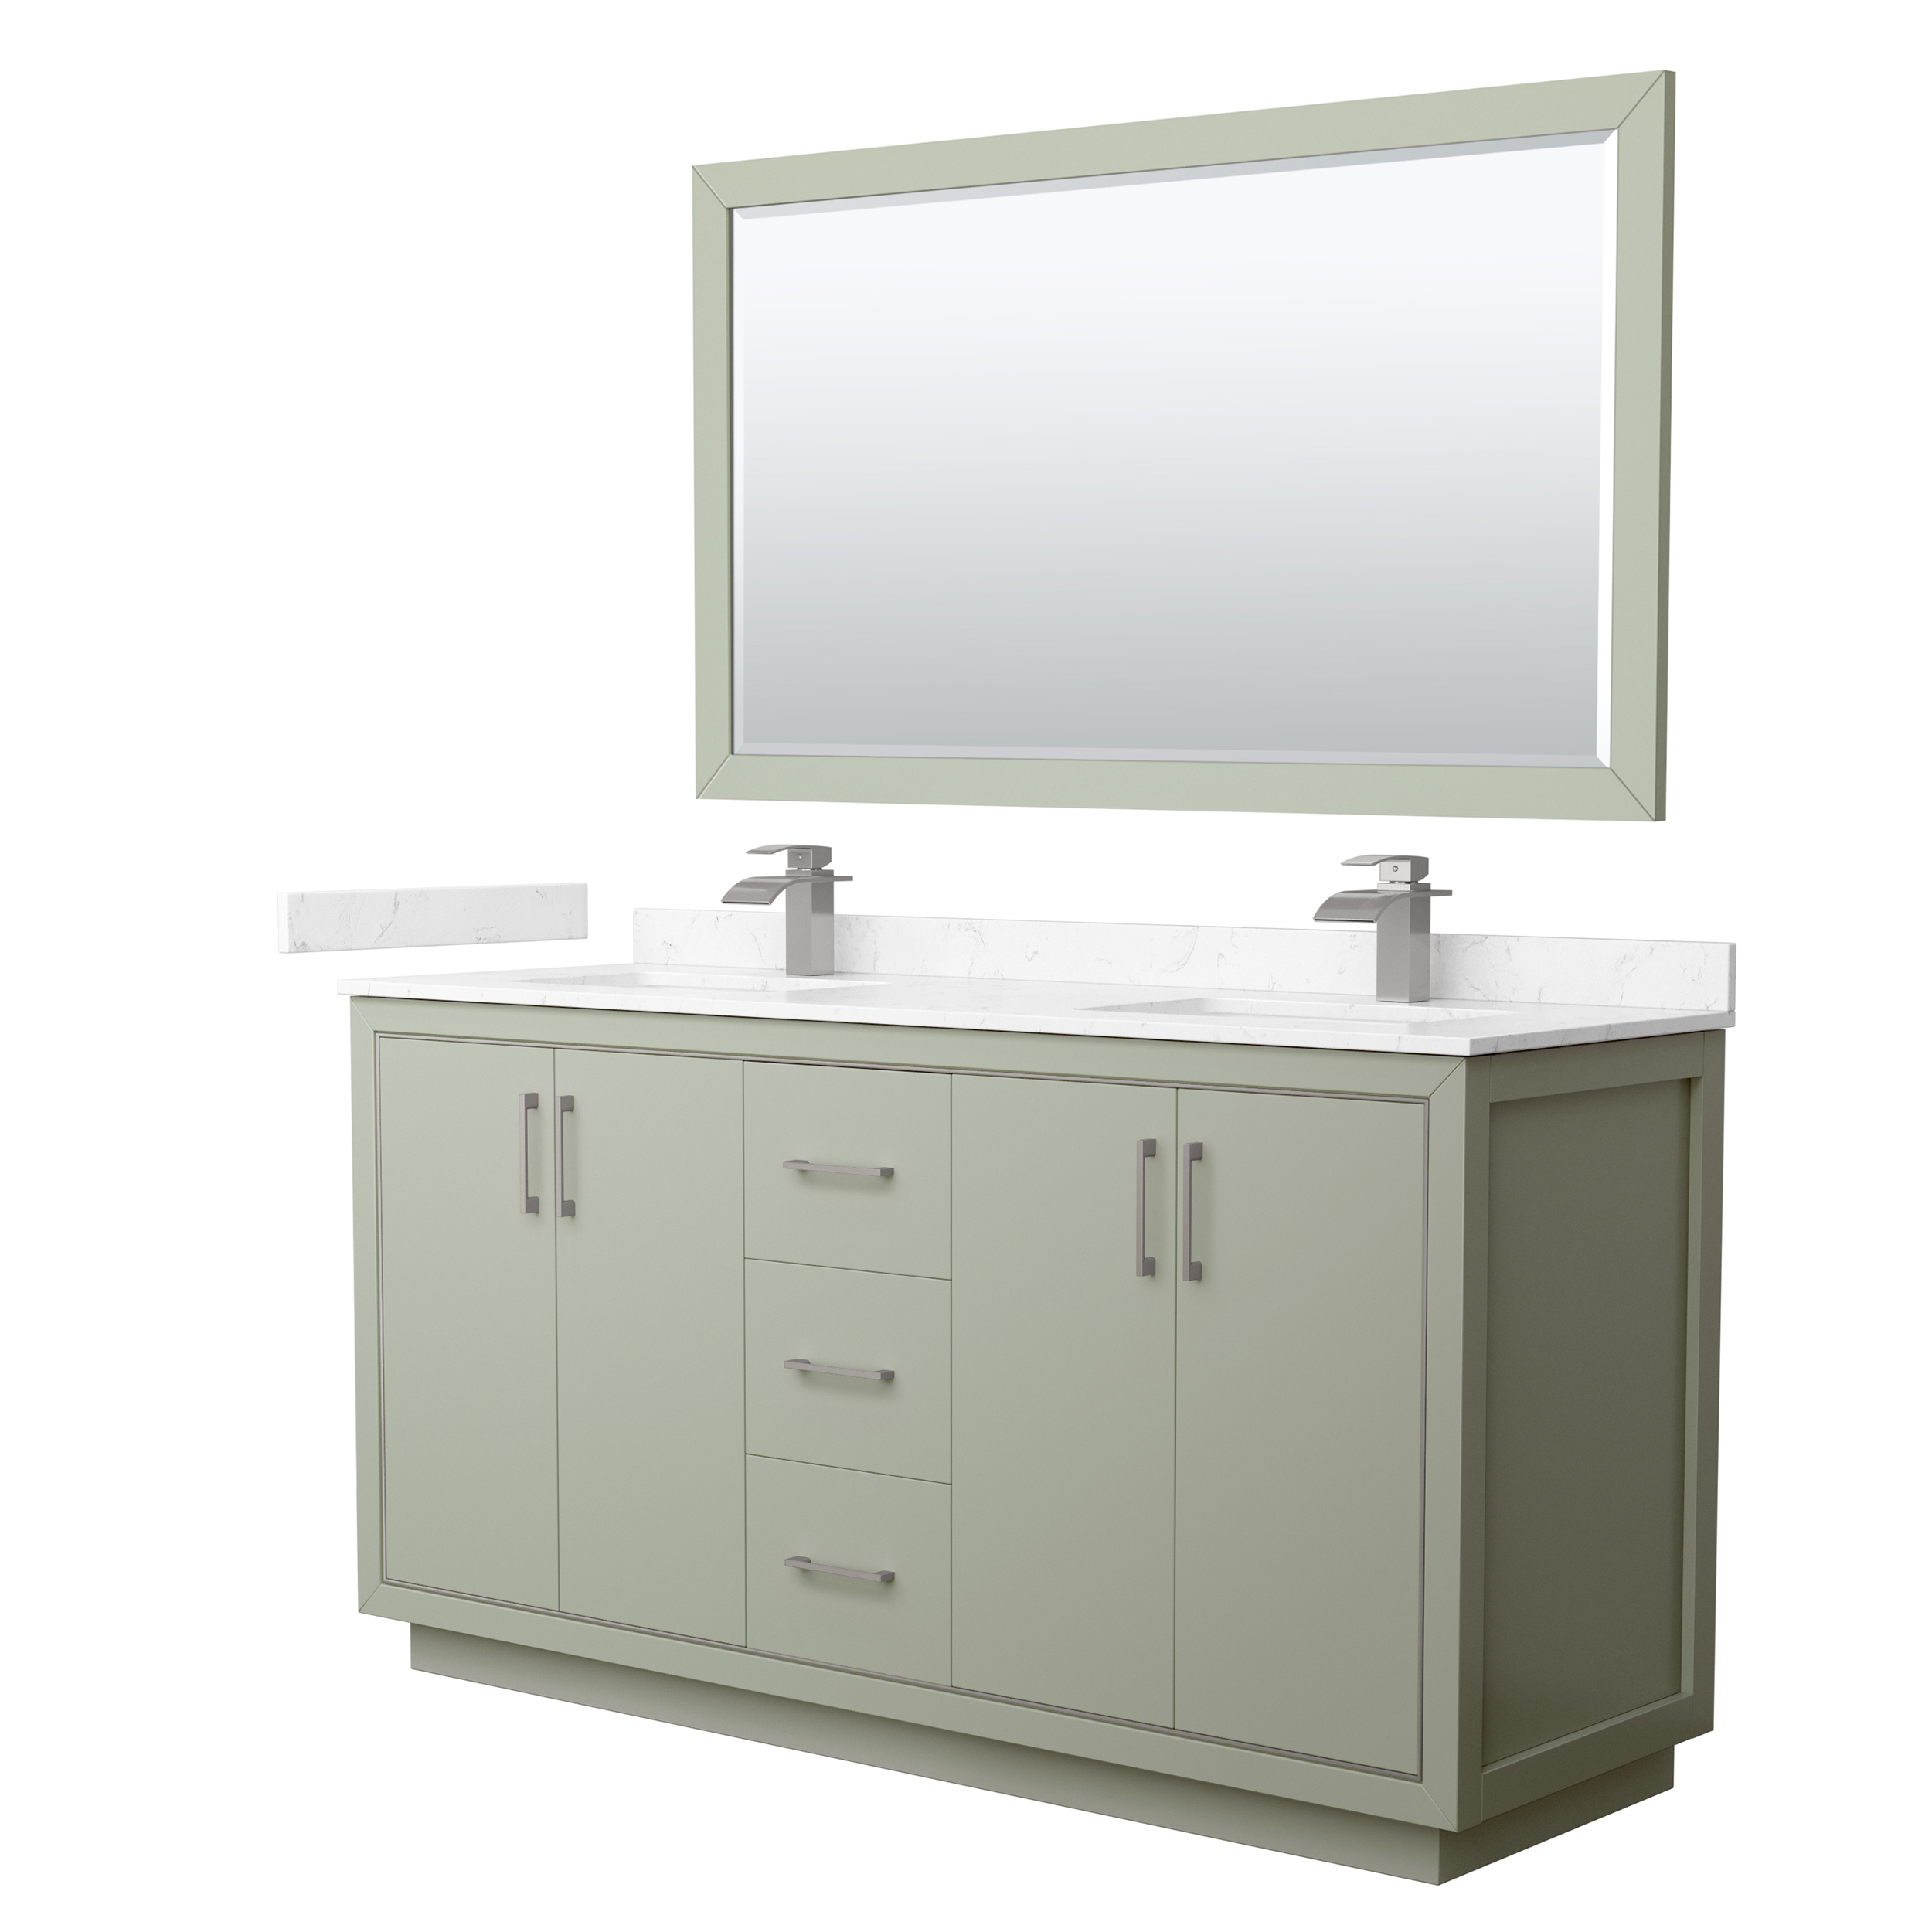 Icon 66" Double Vanity with optional Cultured Marble Counter - Light Green WC-1111-66-DBL-VAN-LGN-